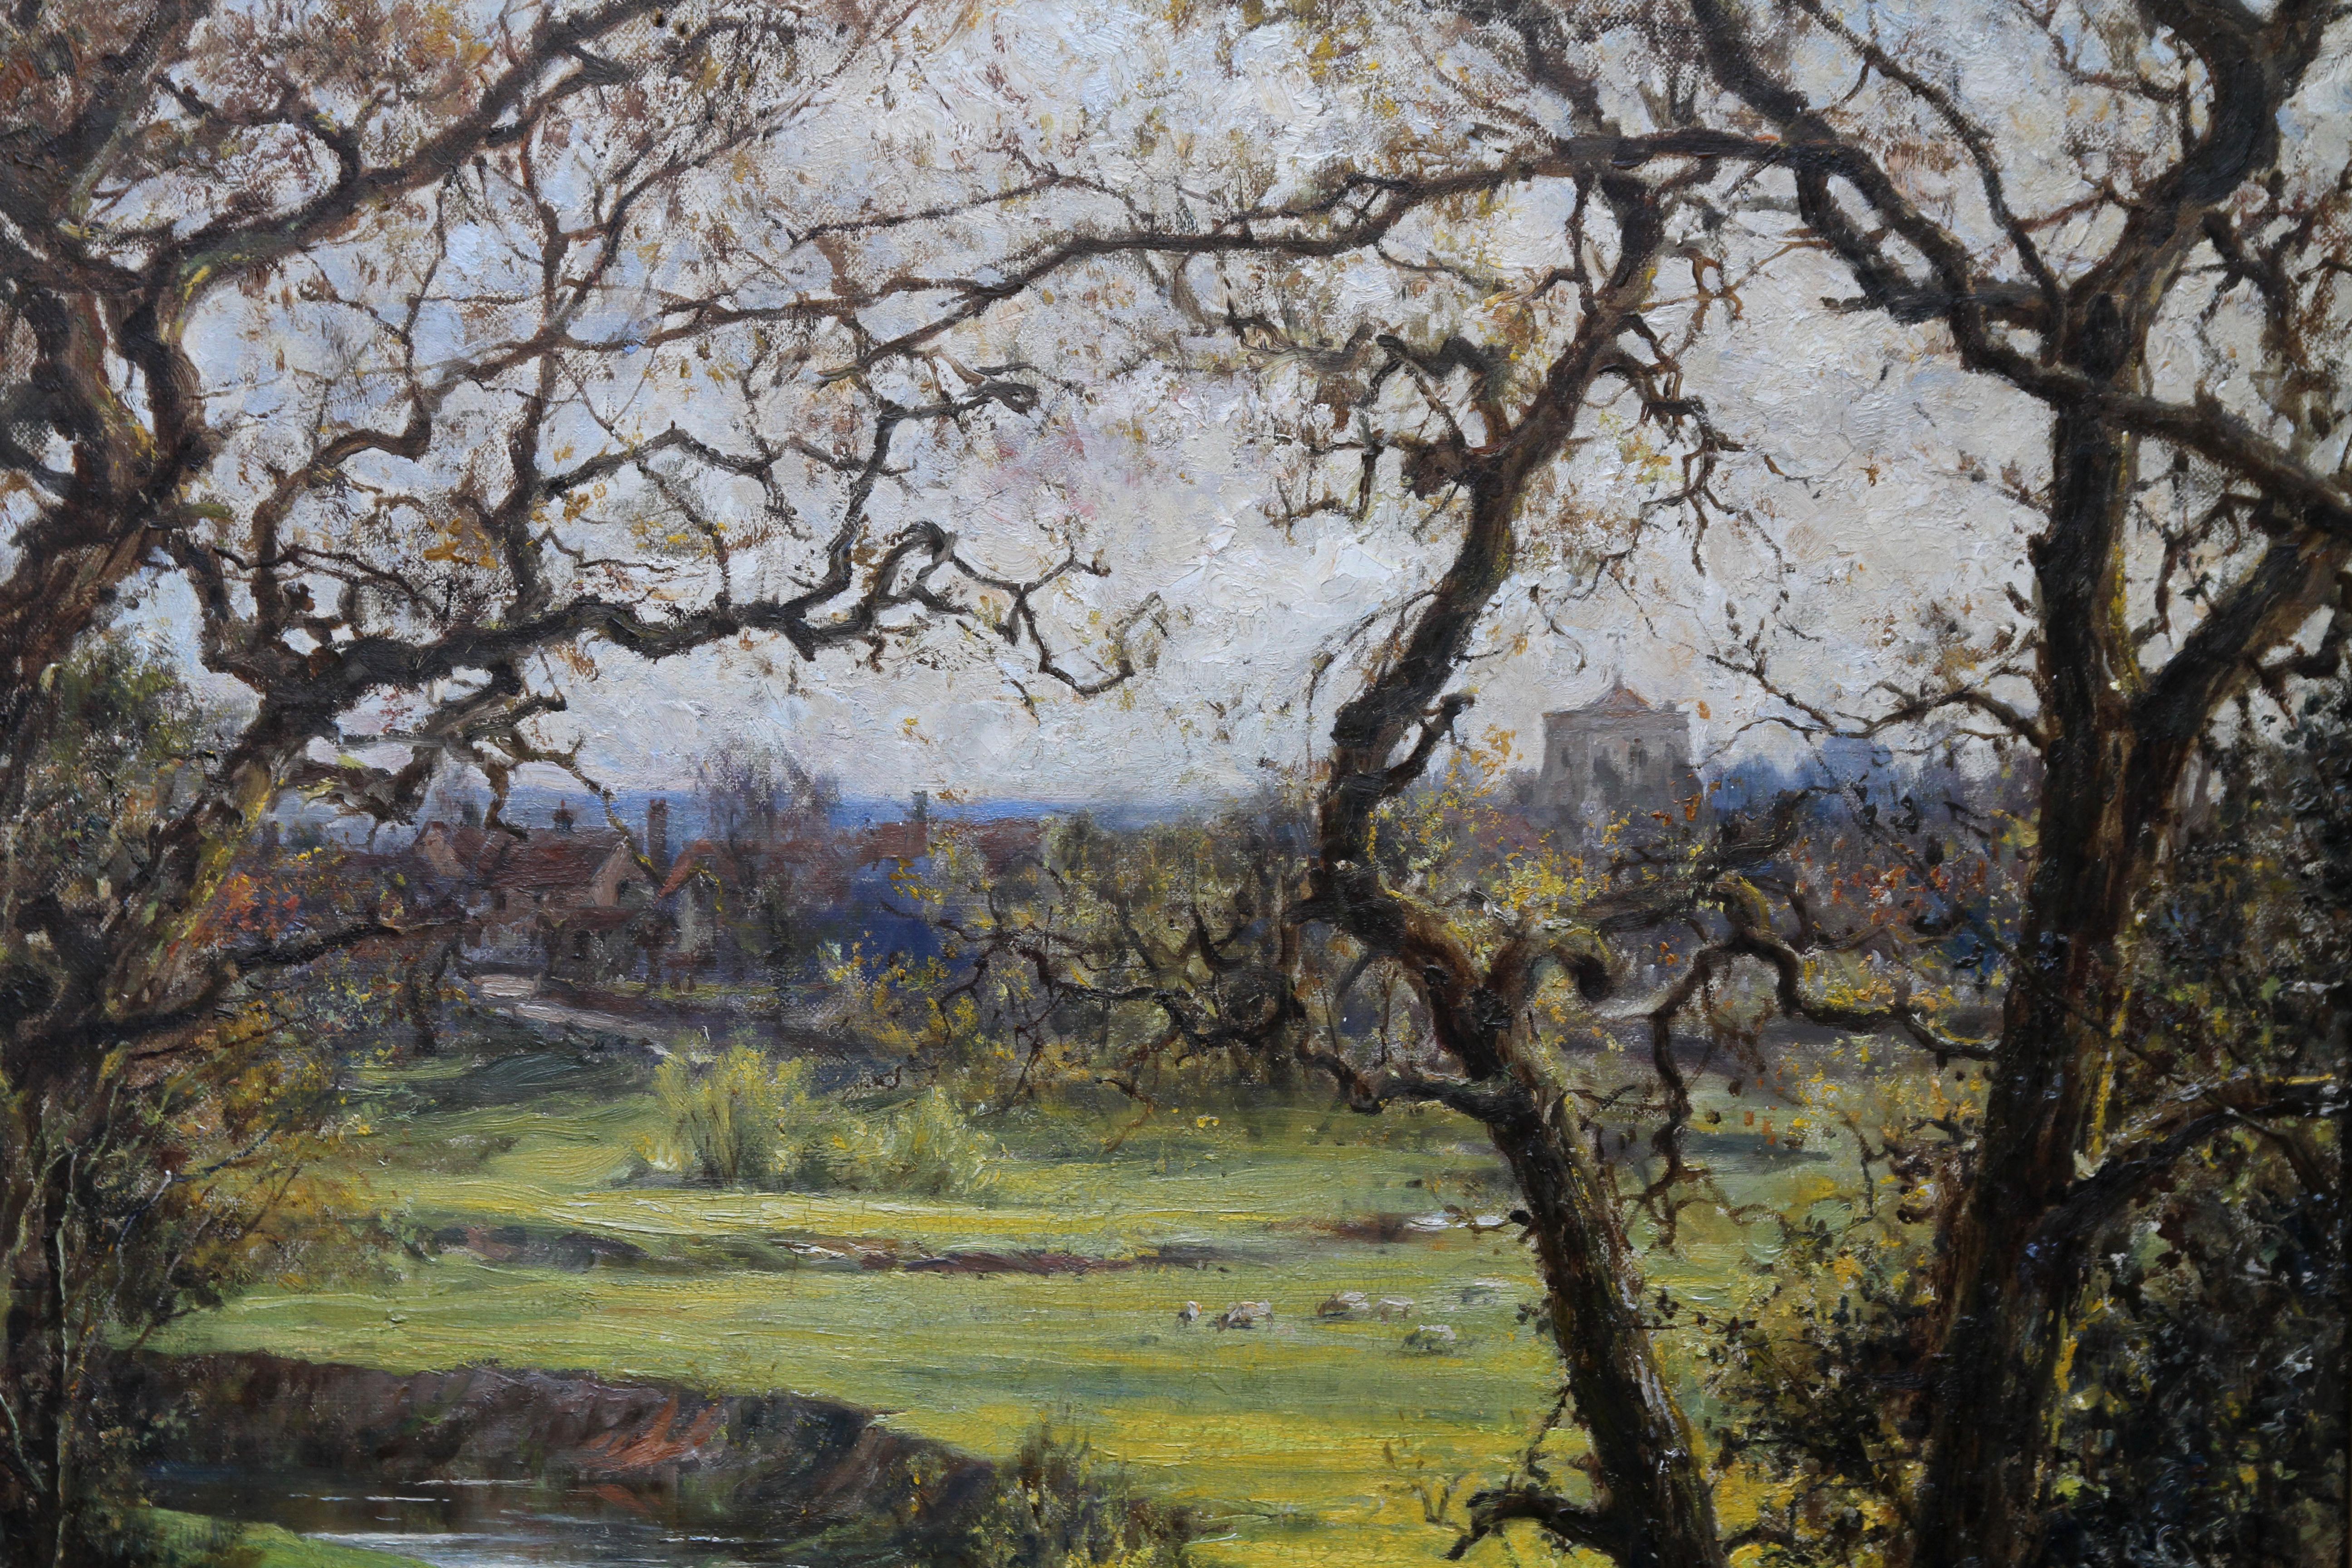 Surrey Landscape - British early 20thC Impressionist Slade School oil painting  - Realist Painting by Robert Morley